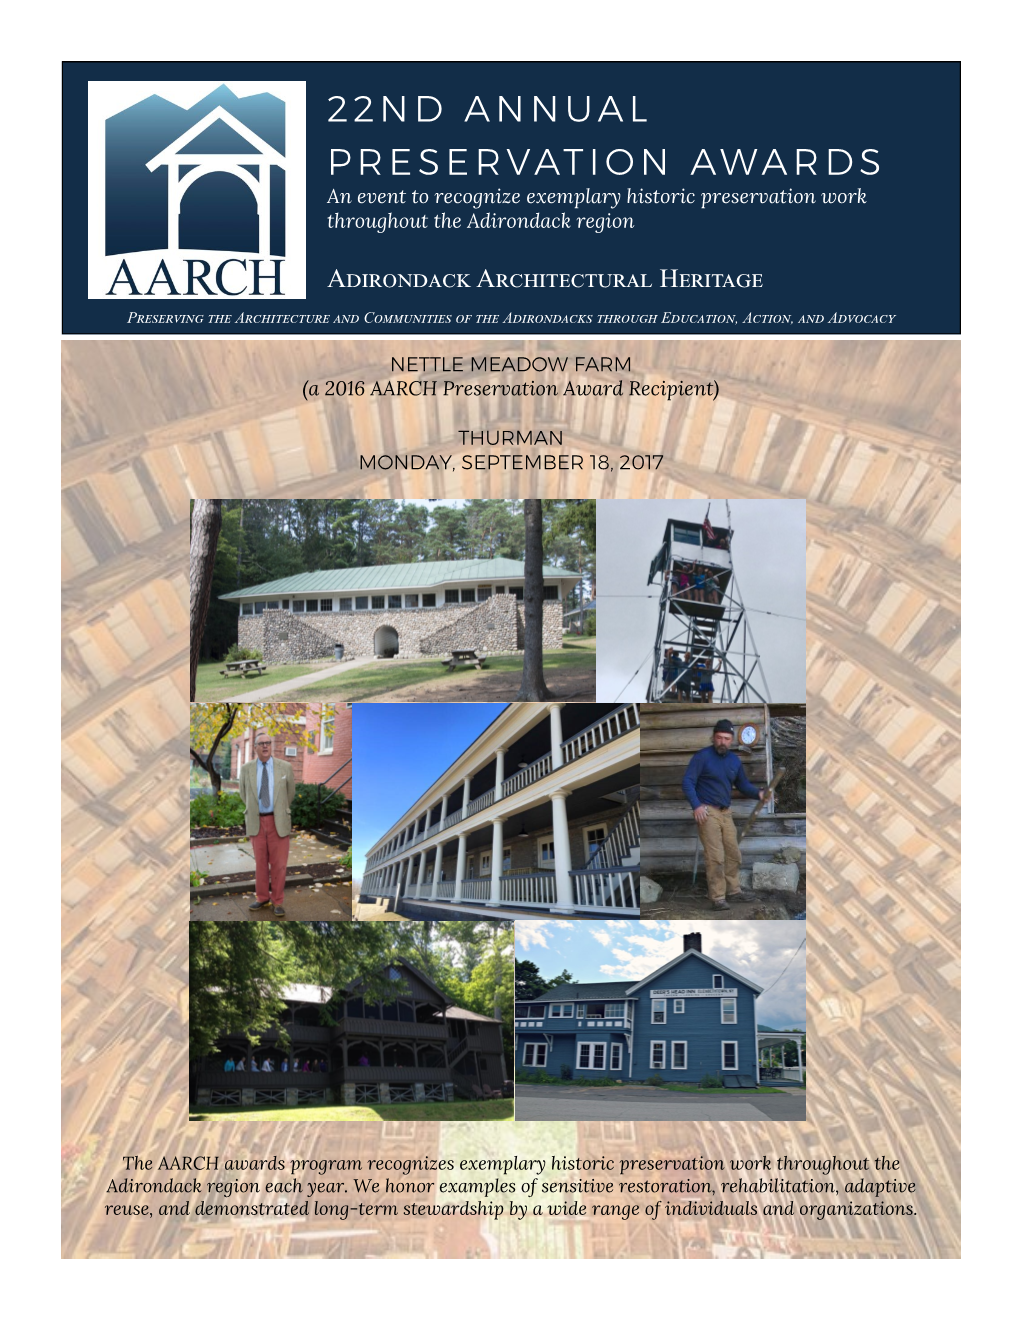 22ND ANNUAL PRESERVATION AWARDS an Event to Recognize Exemplary Historic Preservation Work Throughout the Adirondack Region